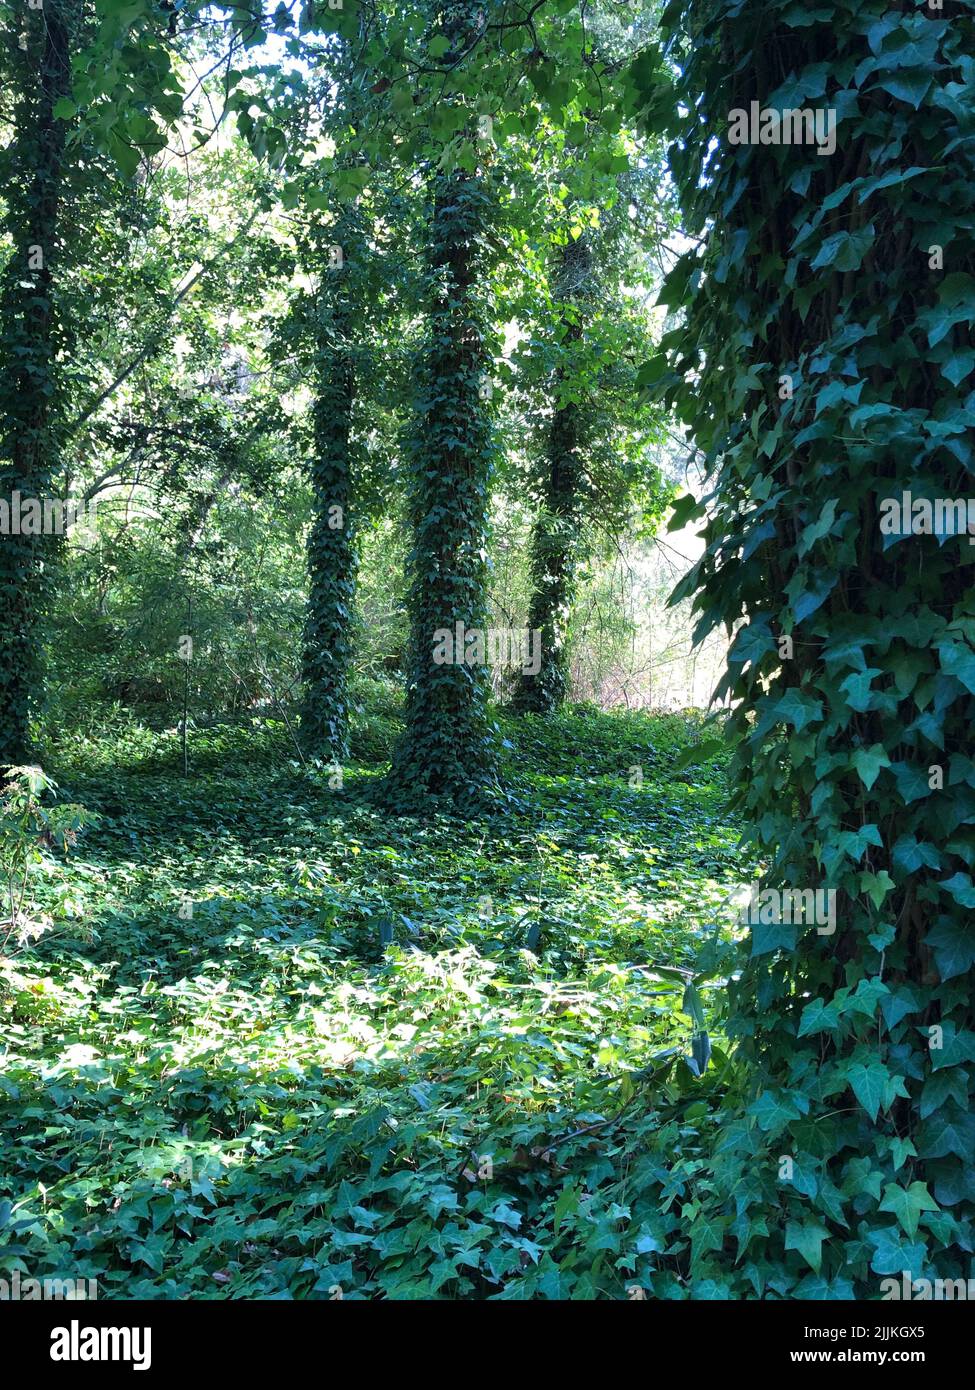 A vertical shot of trees covered with climbing green leaves in a forest in sunlight Stock Photo